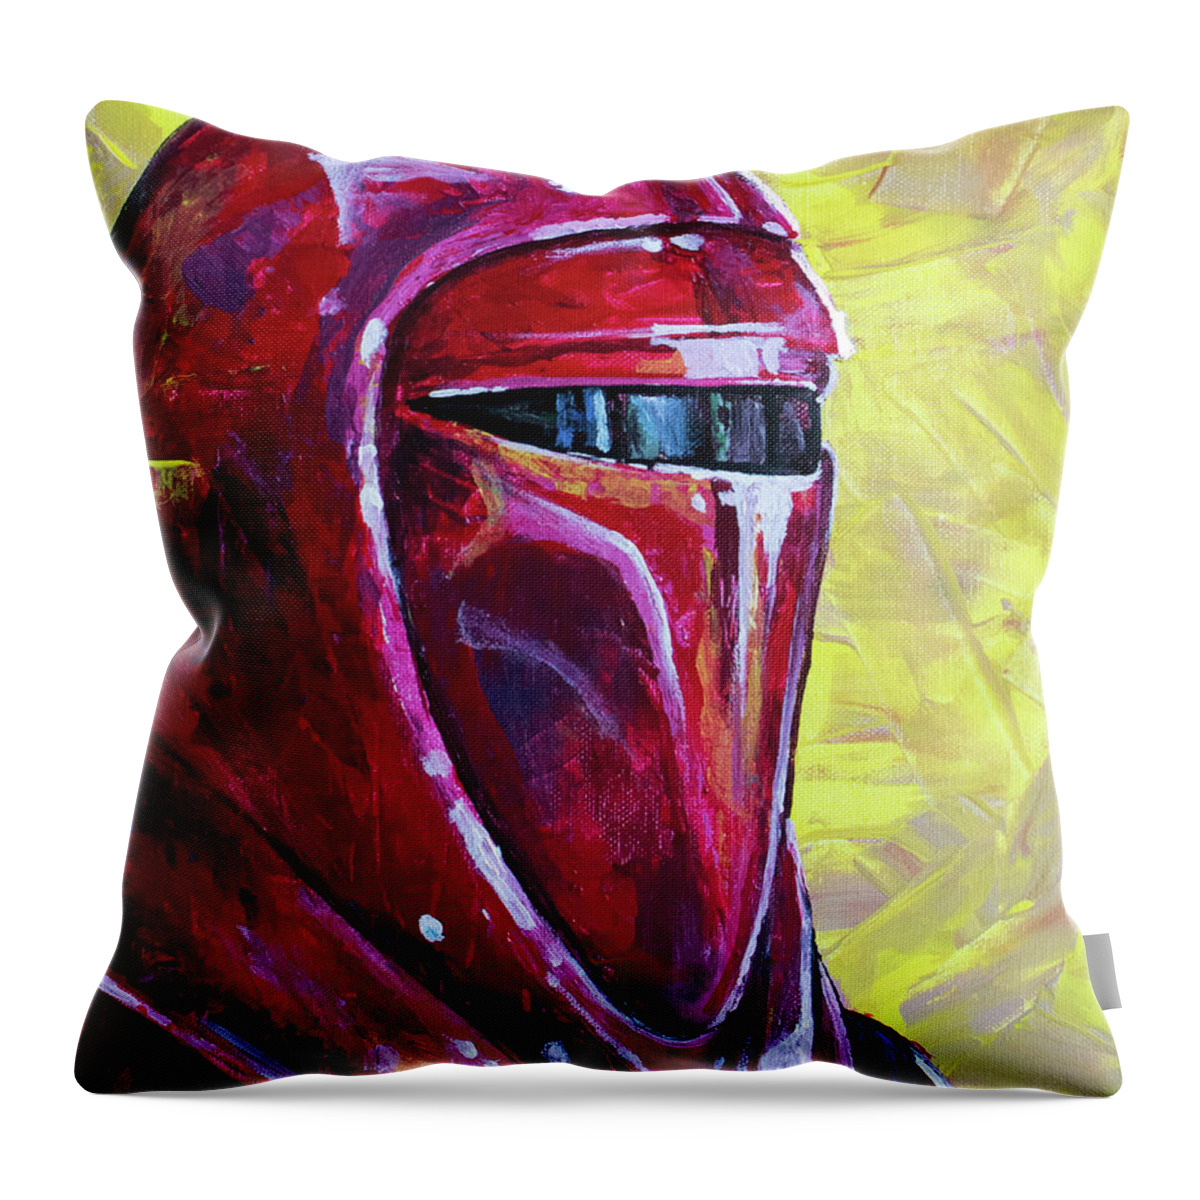 Star Wars Throw Pillow featuring the painting Imperial Guard by Aaron Spong